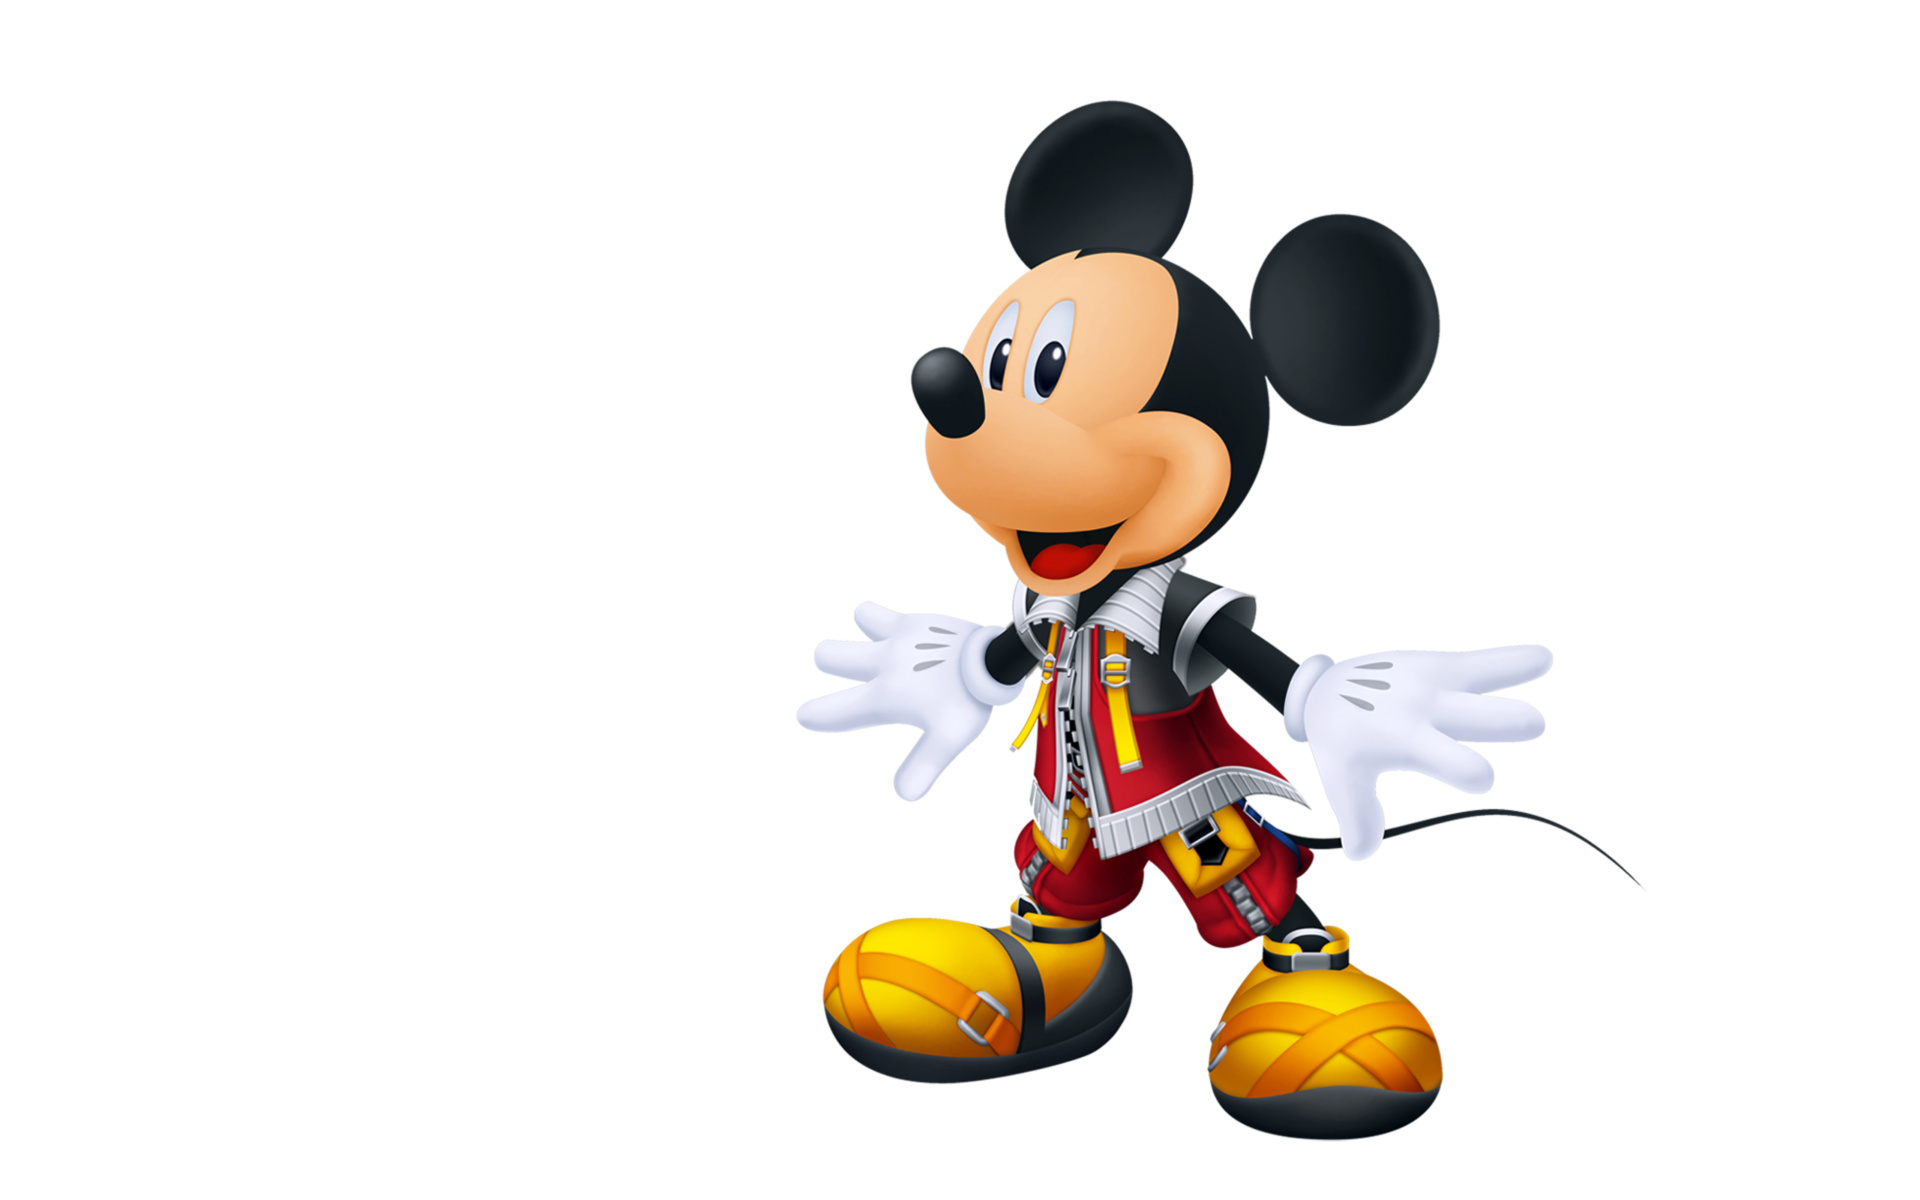 King Mickey Mouse, Animated royalty, Iconic character, Classic animation, 1920x1200 HD Desktop